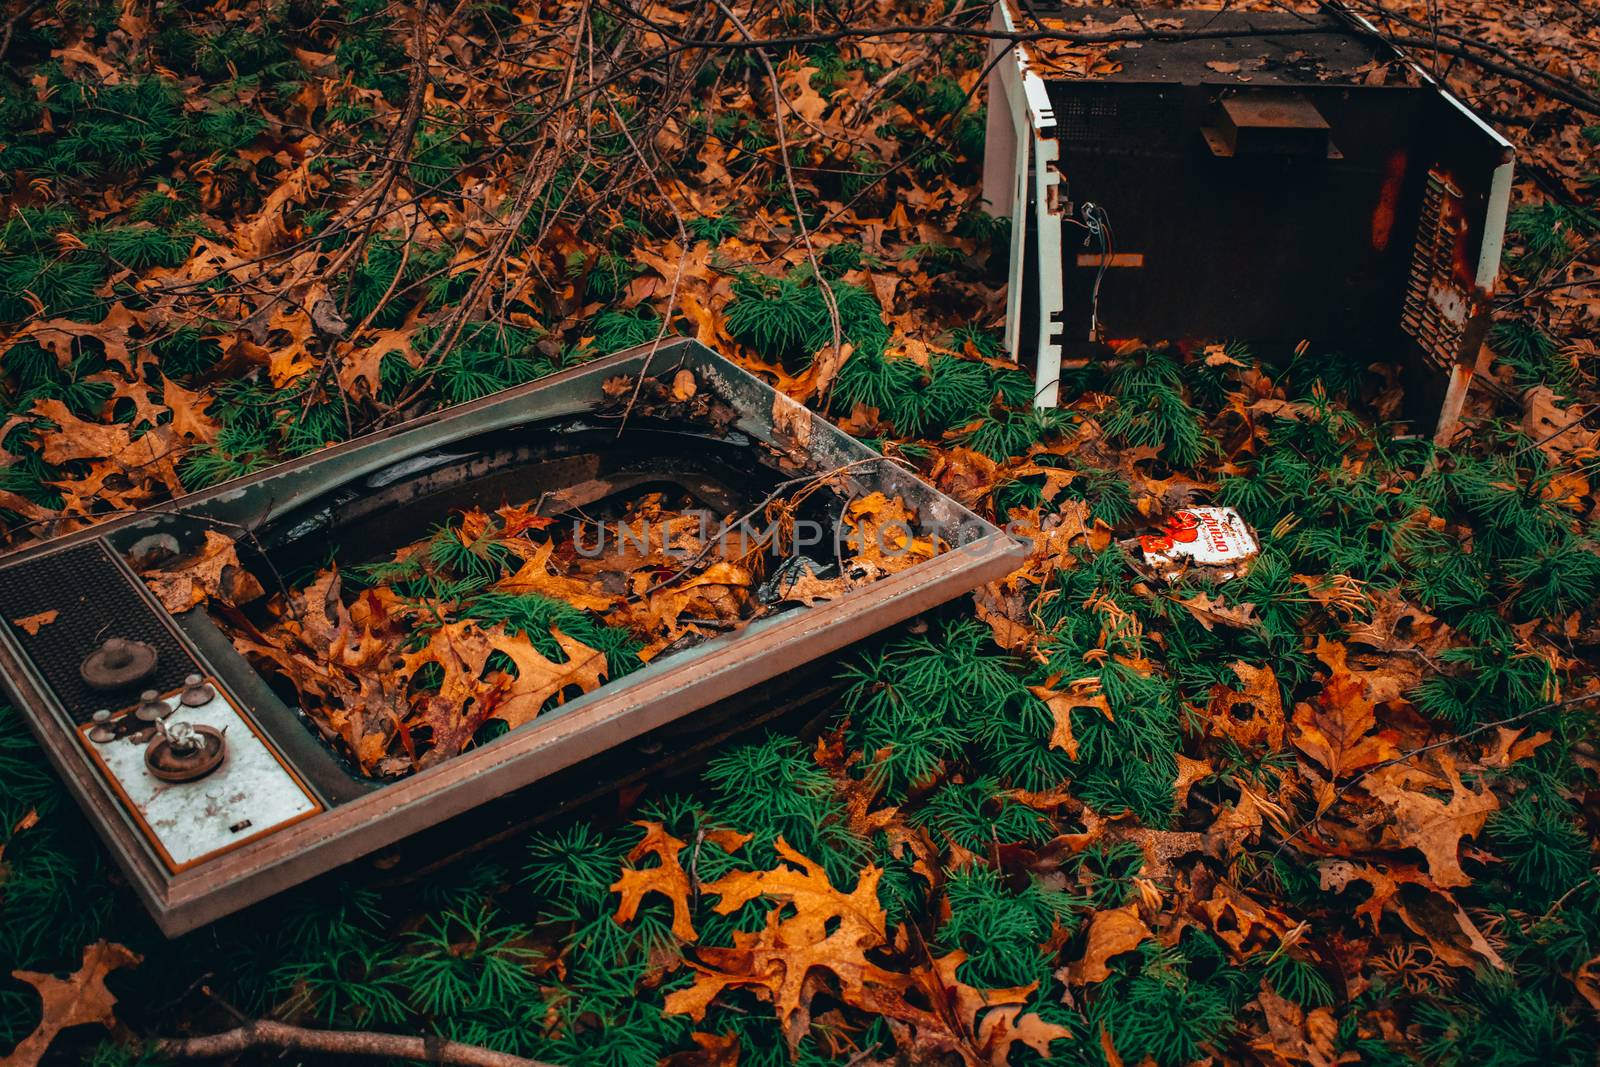 A Vintage Broken Television Set in a Patch of Grass and Orange Leaves